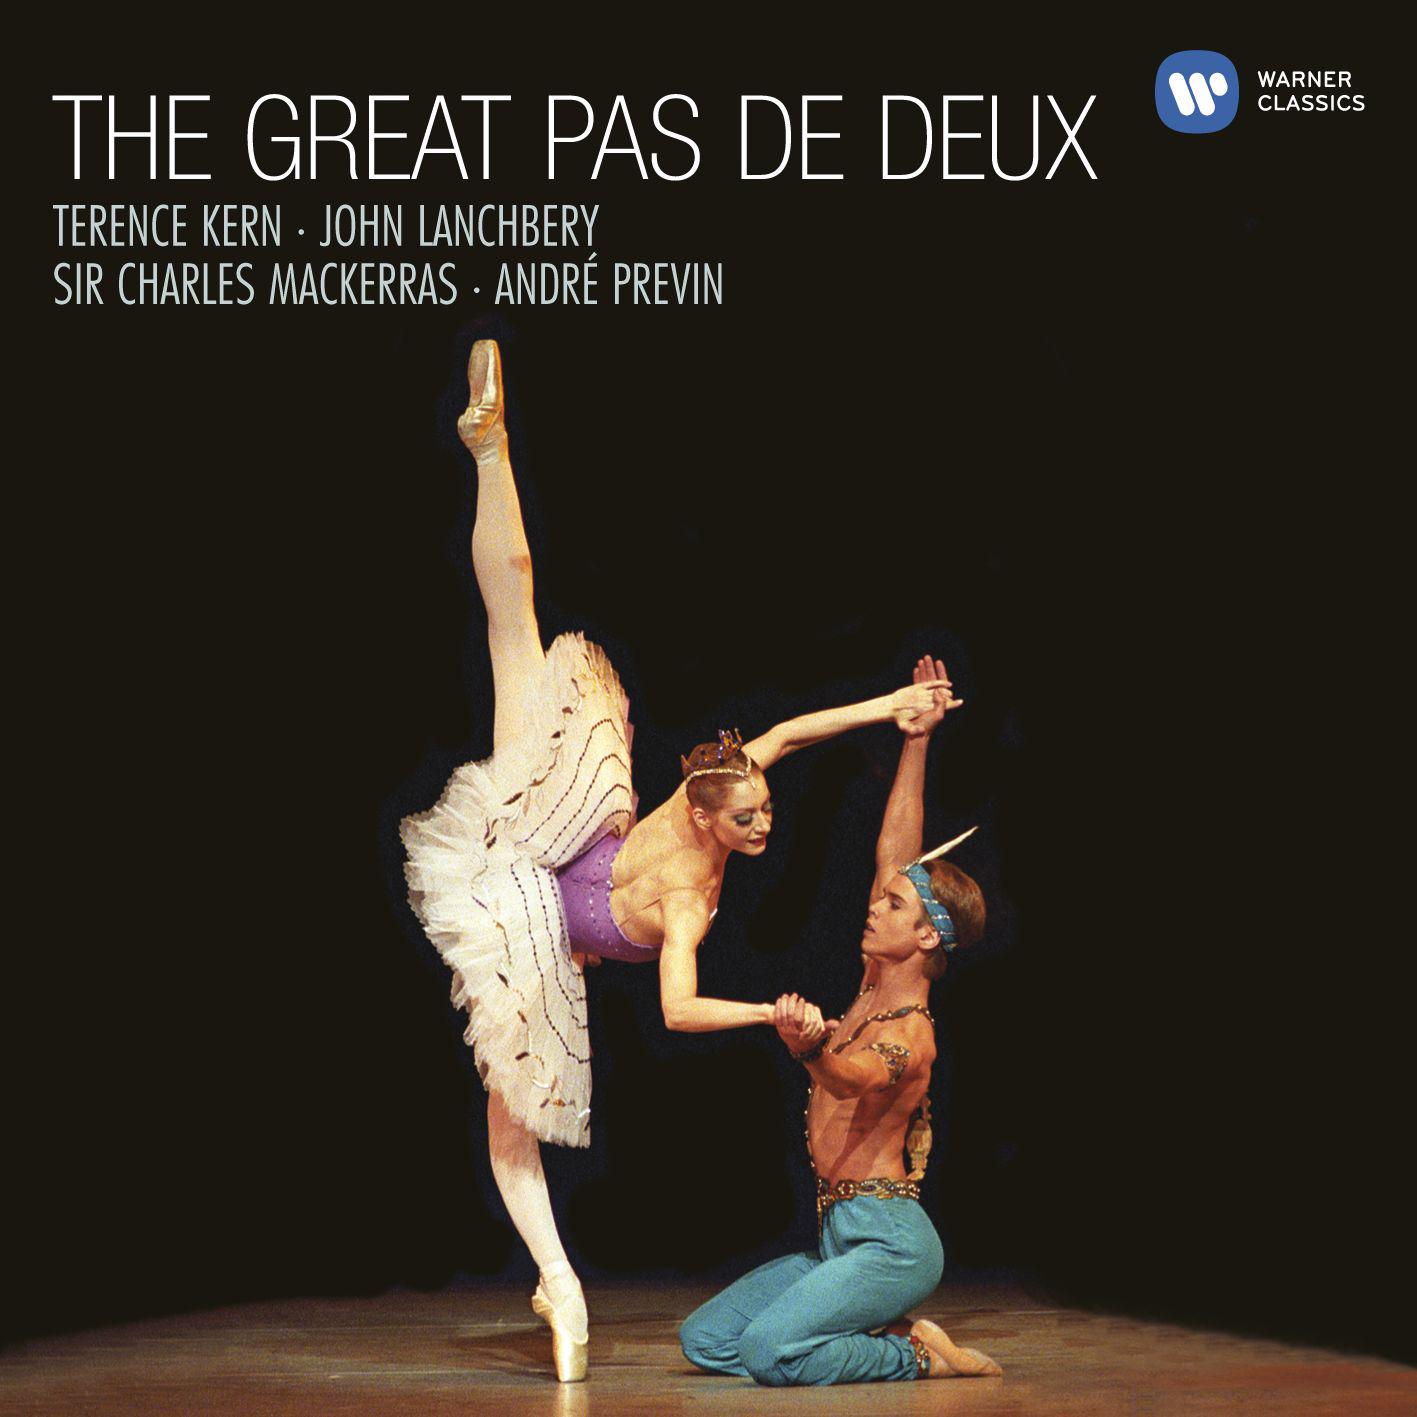 Pas de deux from " Flower Festival in Genzano" adapted from Matthias Strebinger' s " Pas de deux" for " Napoli" Ballet of Bournonville: No. 3, Variation I based on a Waltz from Adolphe Adam' s " Le Diable  quatre"